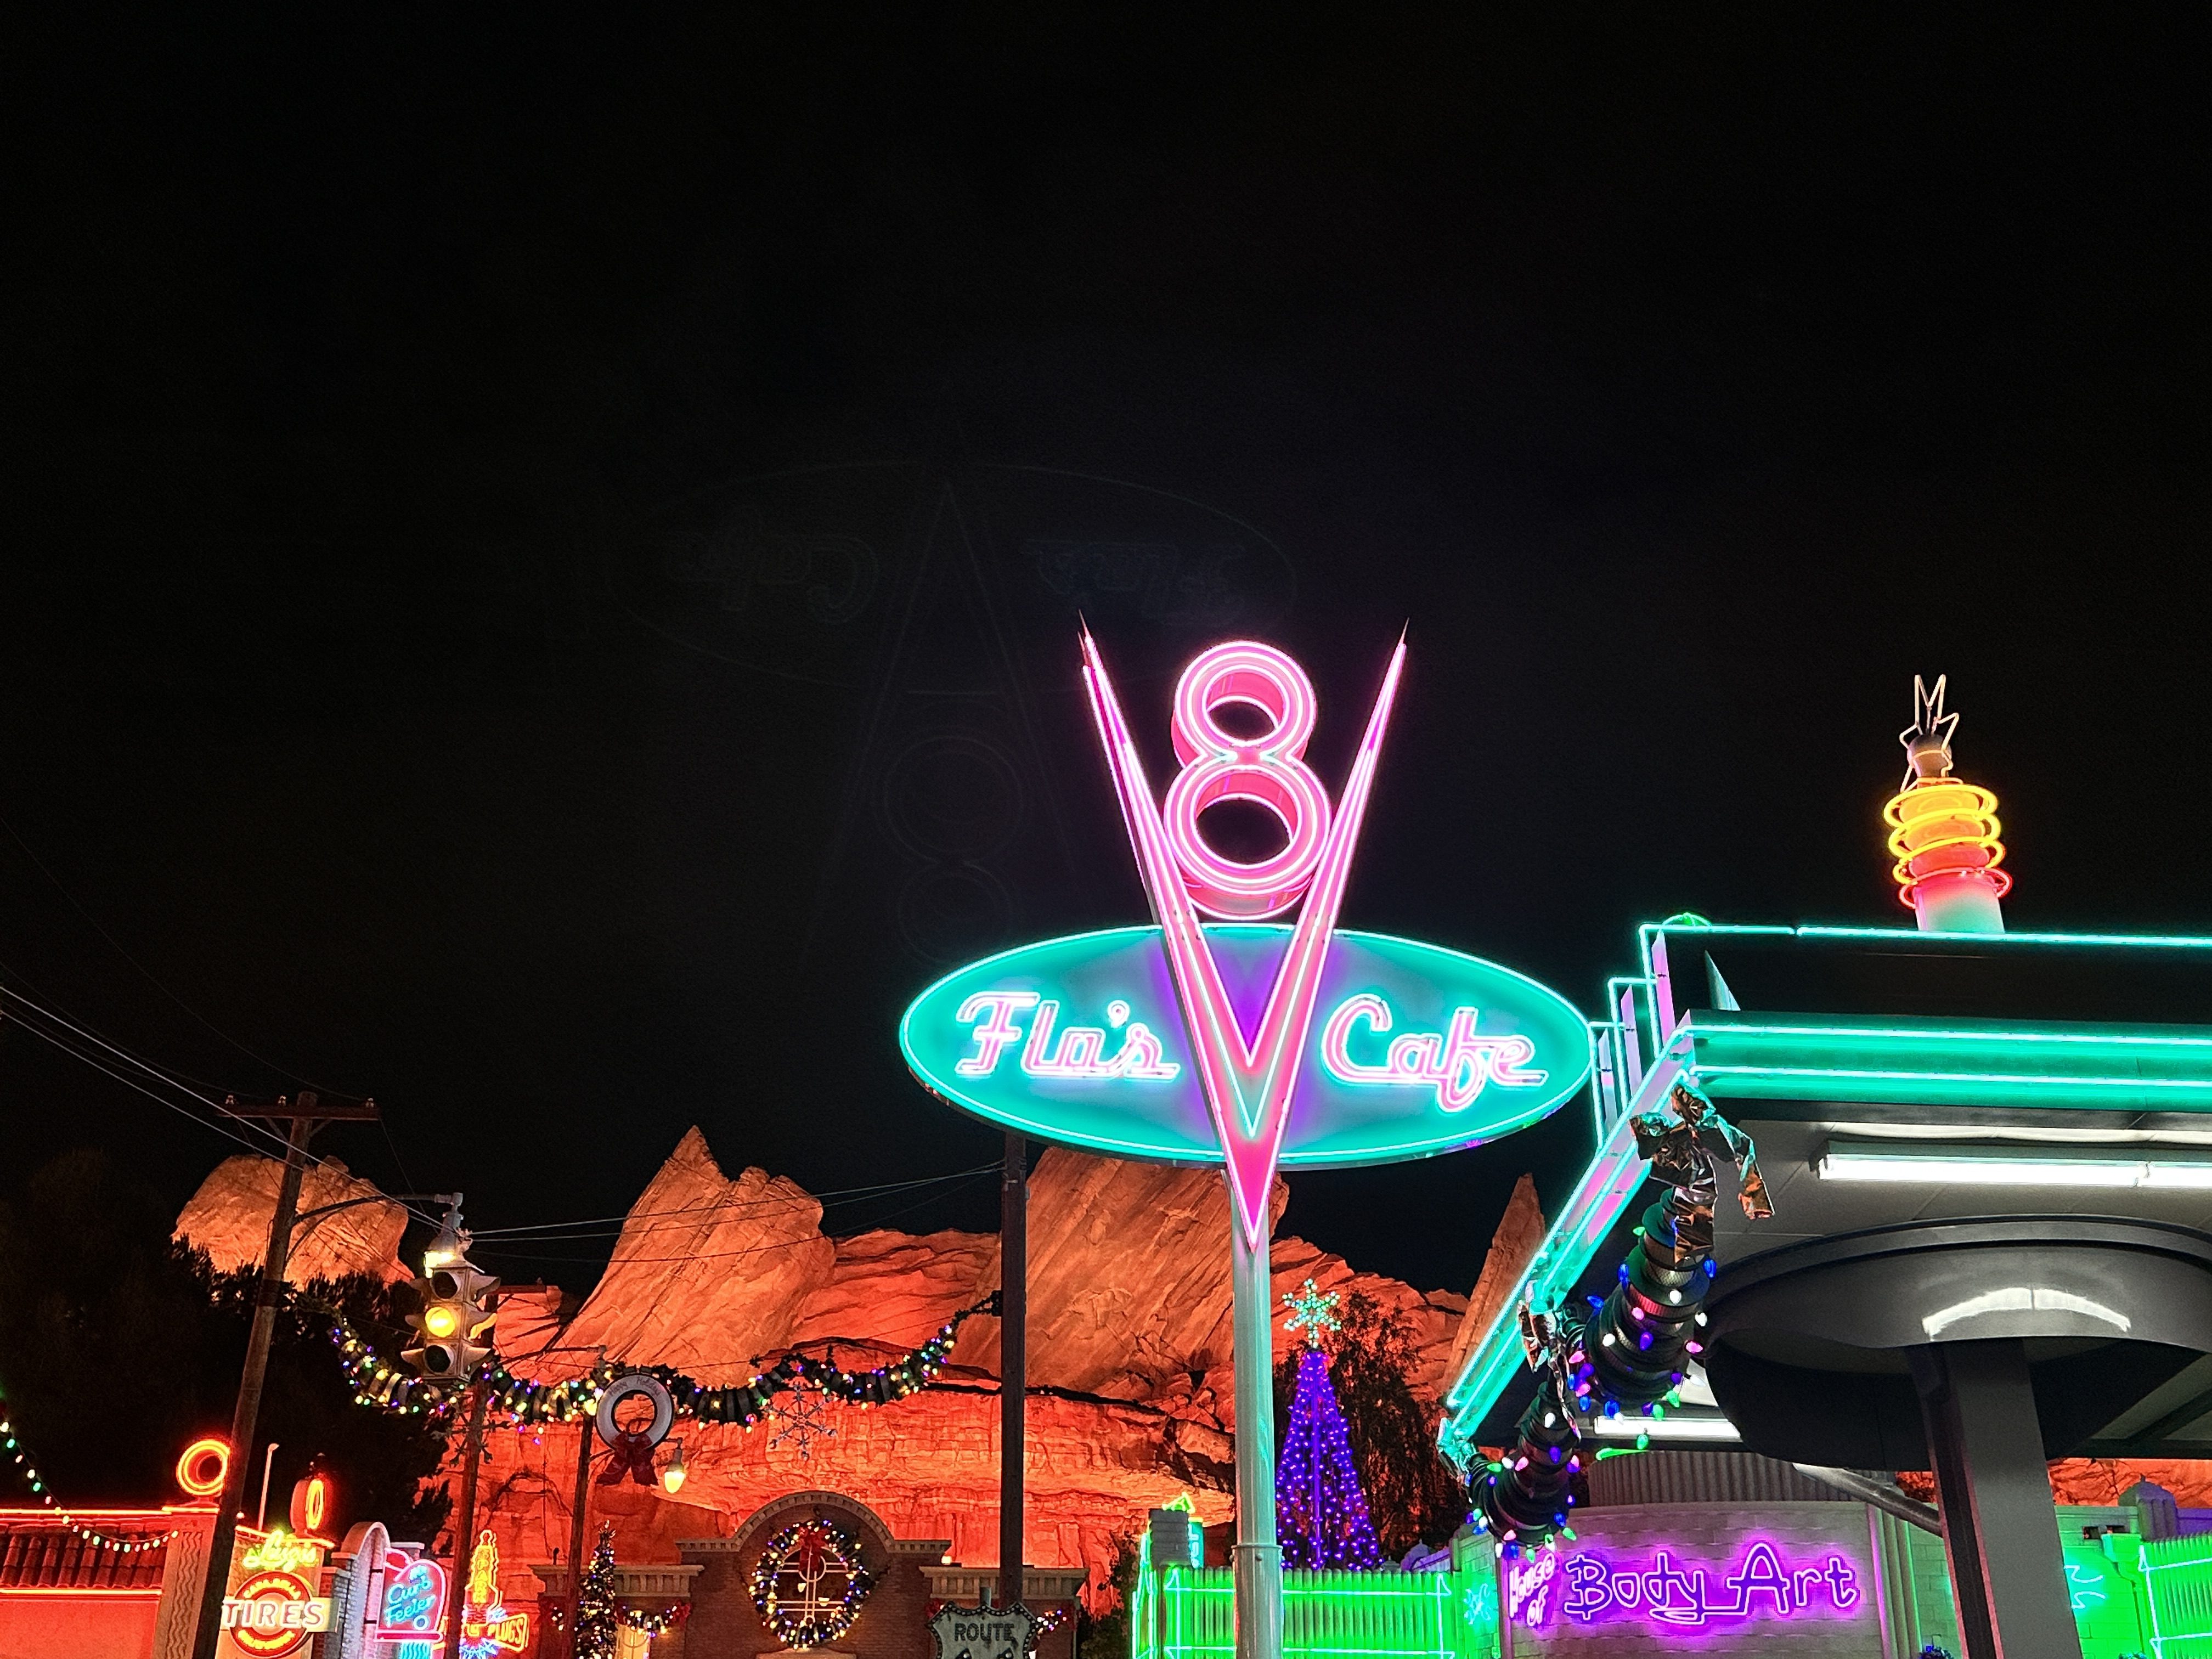 Flo's V8 Cafe neon sign vibrant style